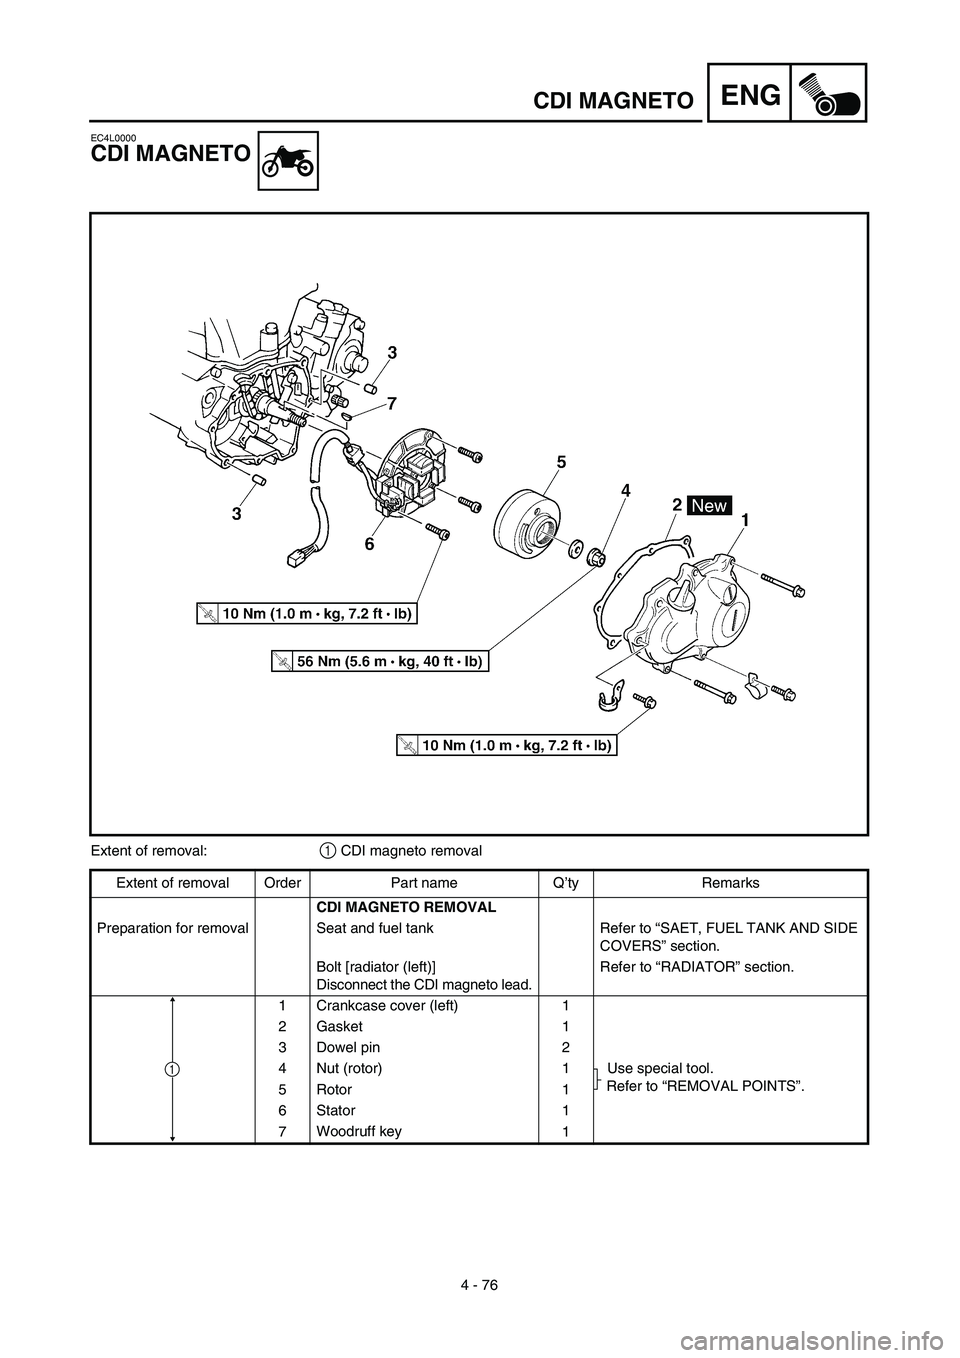 YAMAHA YZ450F 2003  Owners Manual 4 - 76
ENGCDI MAGNETO
EC4L0000
CDI MAGNETO
Extent of removal:1 CDI magneto removal
Extent of removal Order Part name Q’ty Remarks
CDI MAGNETO REMOVAL
Preparation for removal Seat and fuel tank Refer